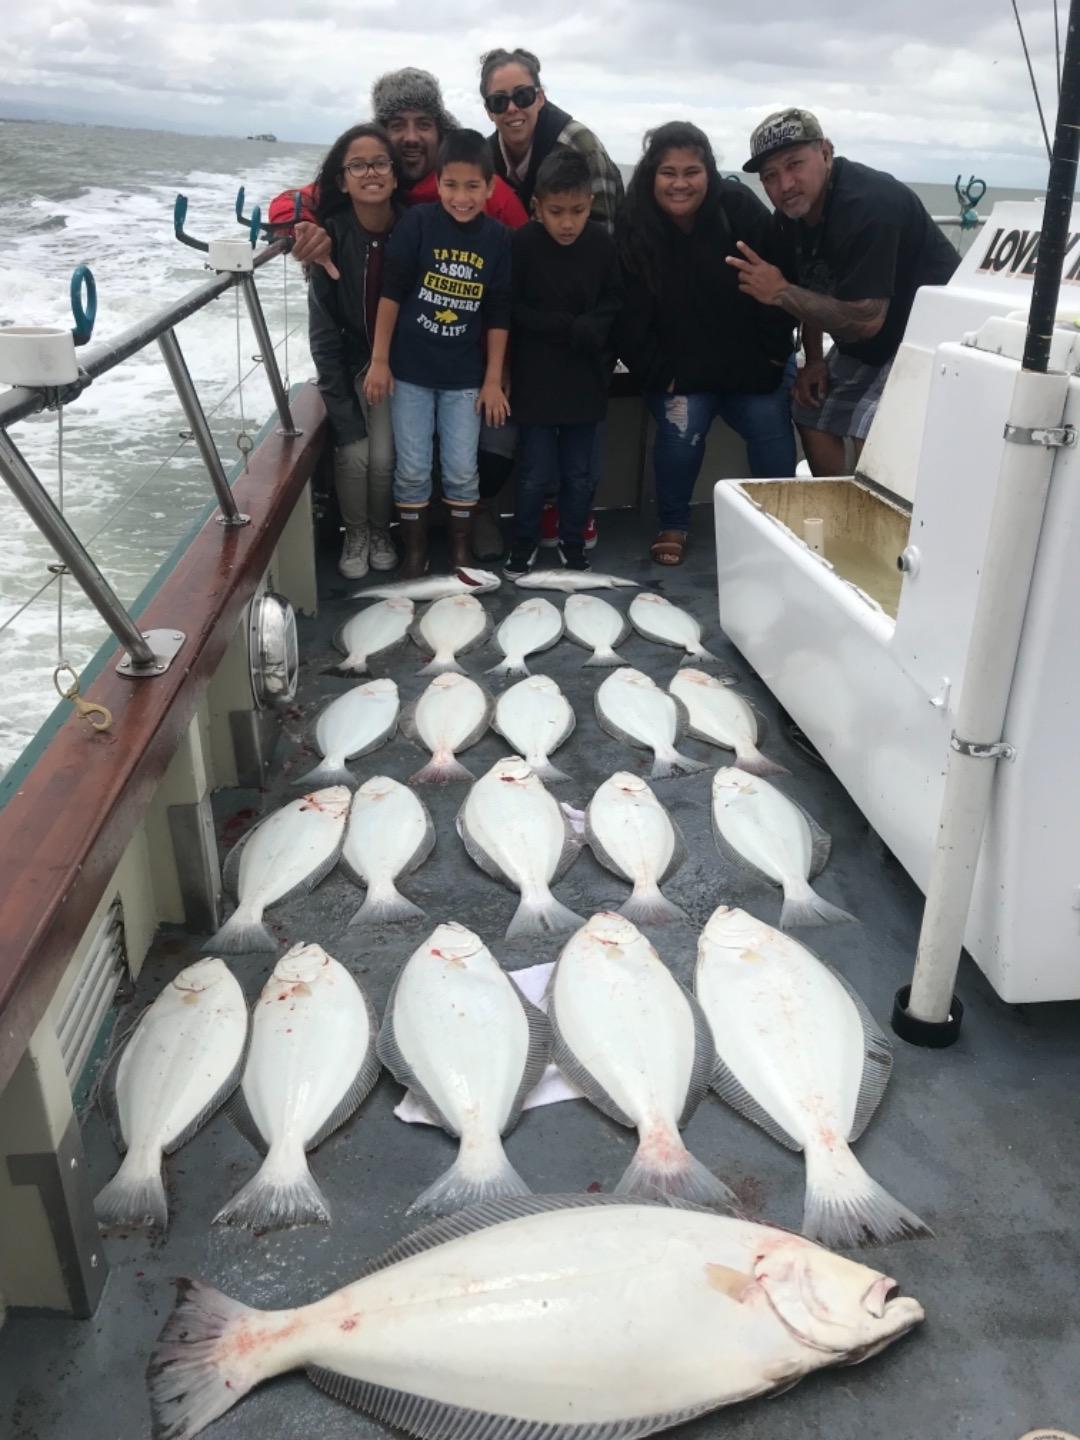 LIMITS of halibut by 10:45!!!